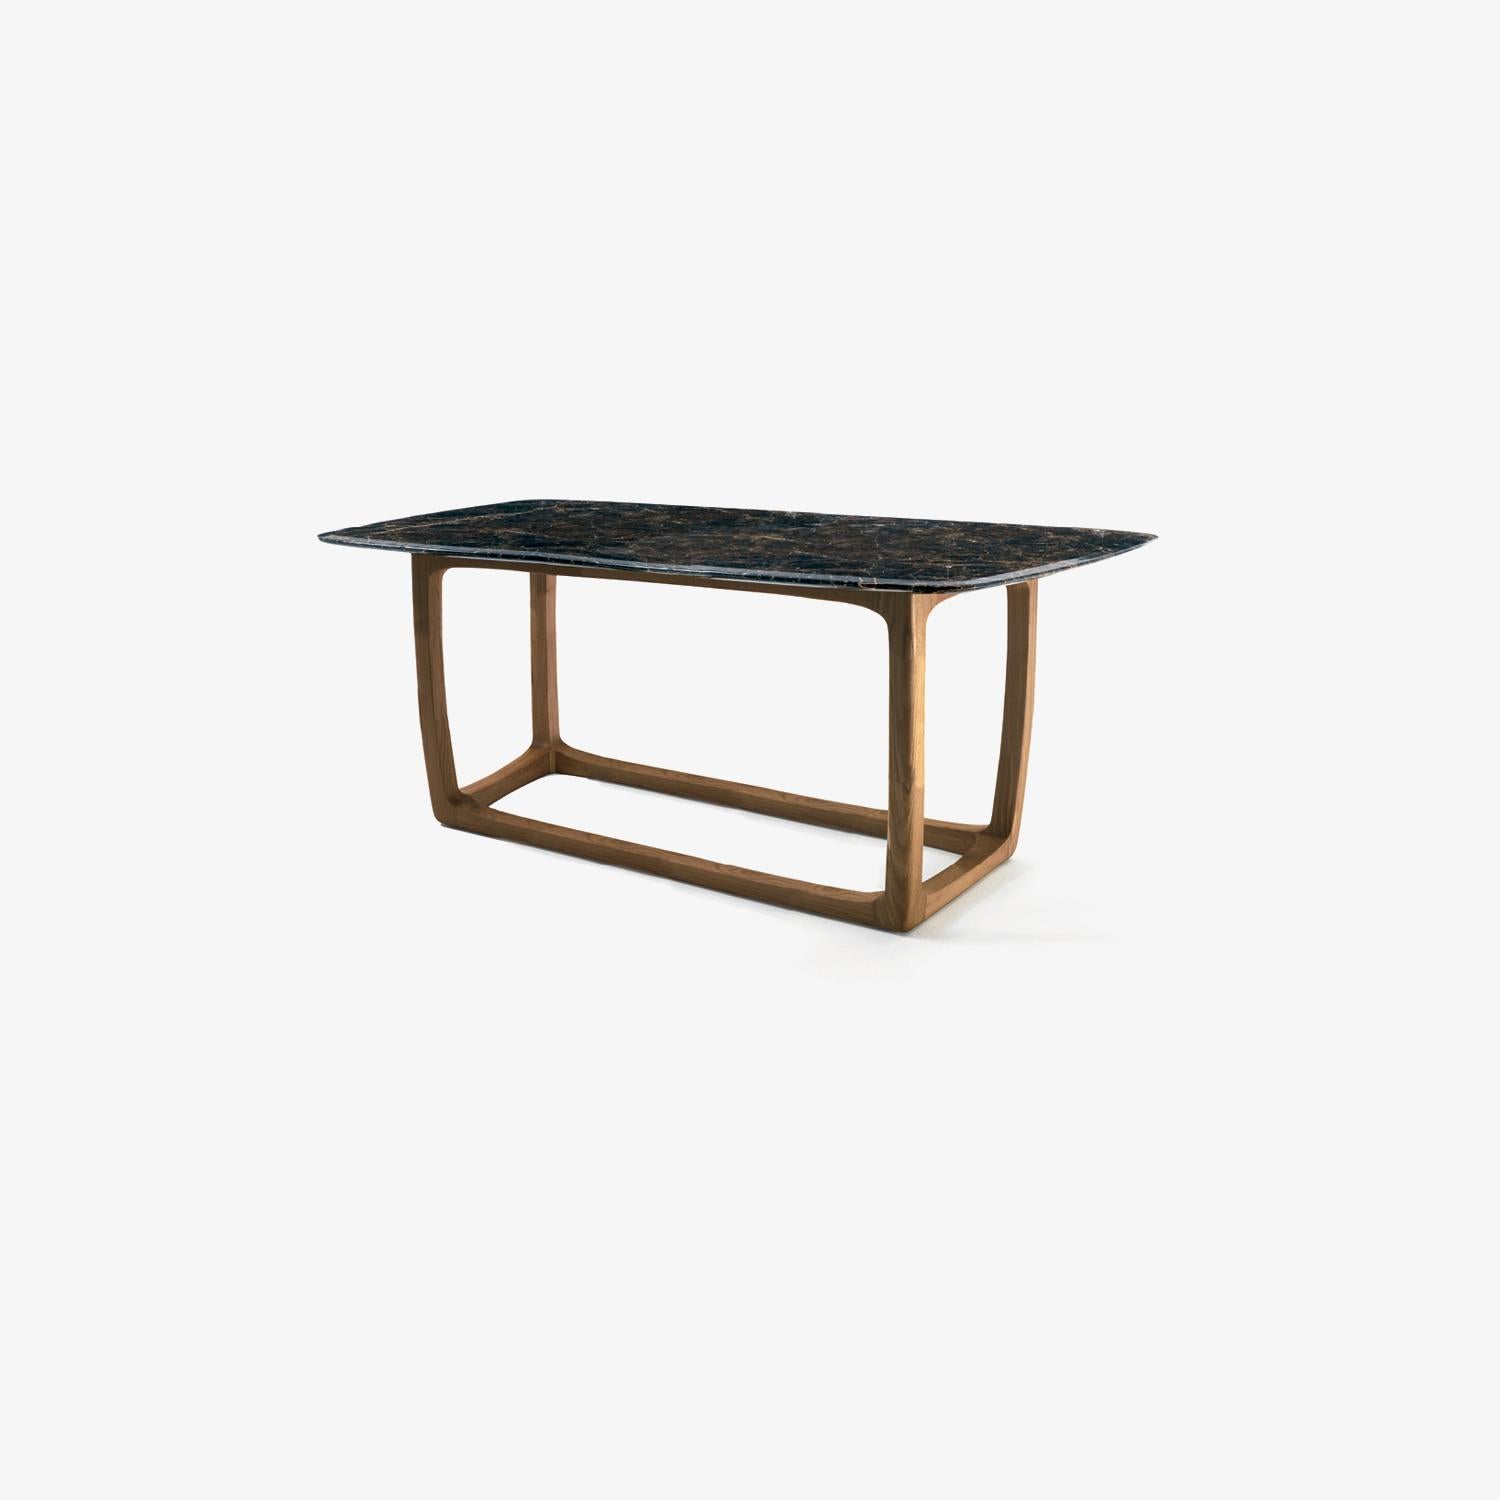 Table with structure in solid teak wood, turned, assembled and smoothed by hand, with square-shaped base combined with a marble top with rounded and protruding edges.